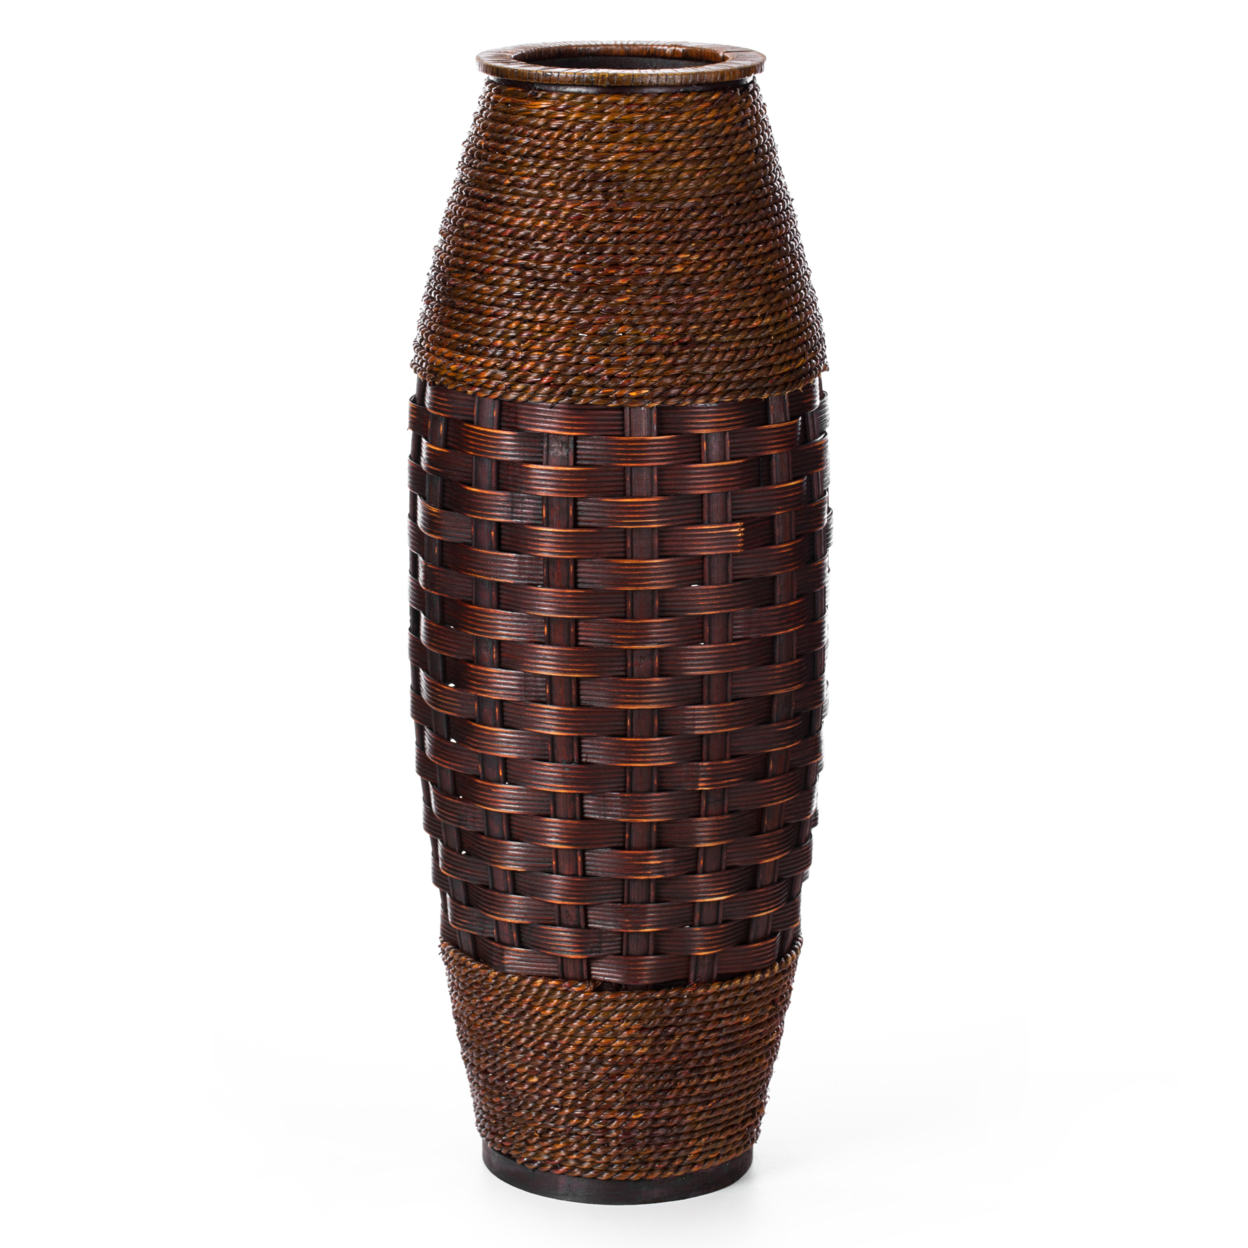 Antique Cylinder Style Floor Vase For Entryway Or Living Room, Bamboo Rope, Brown 26 Tall